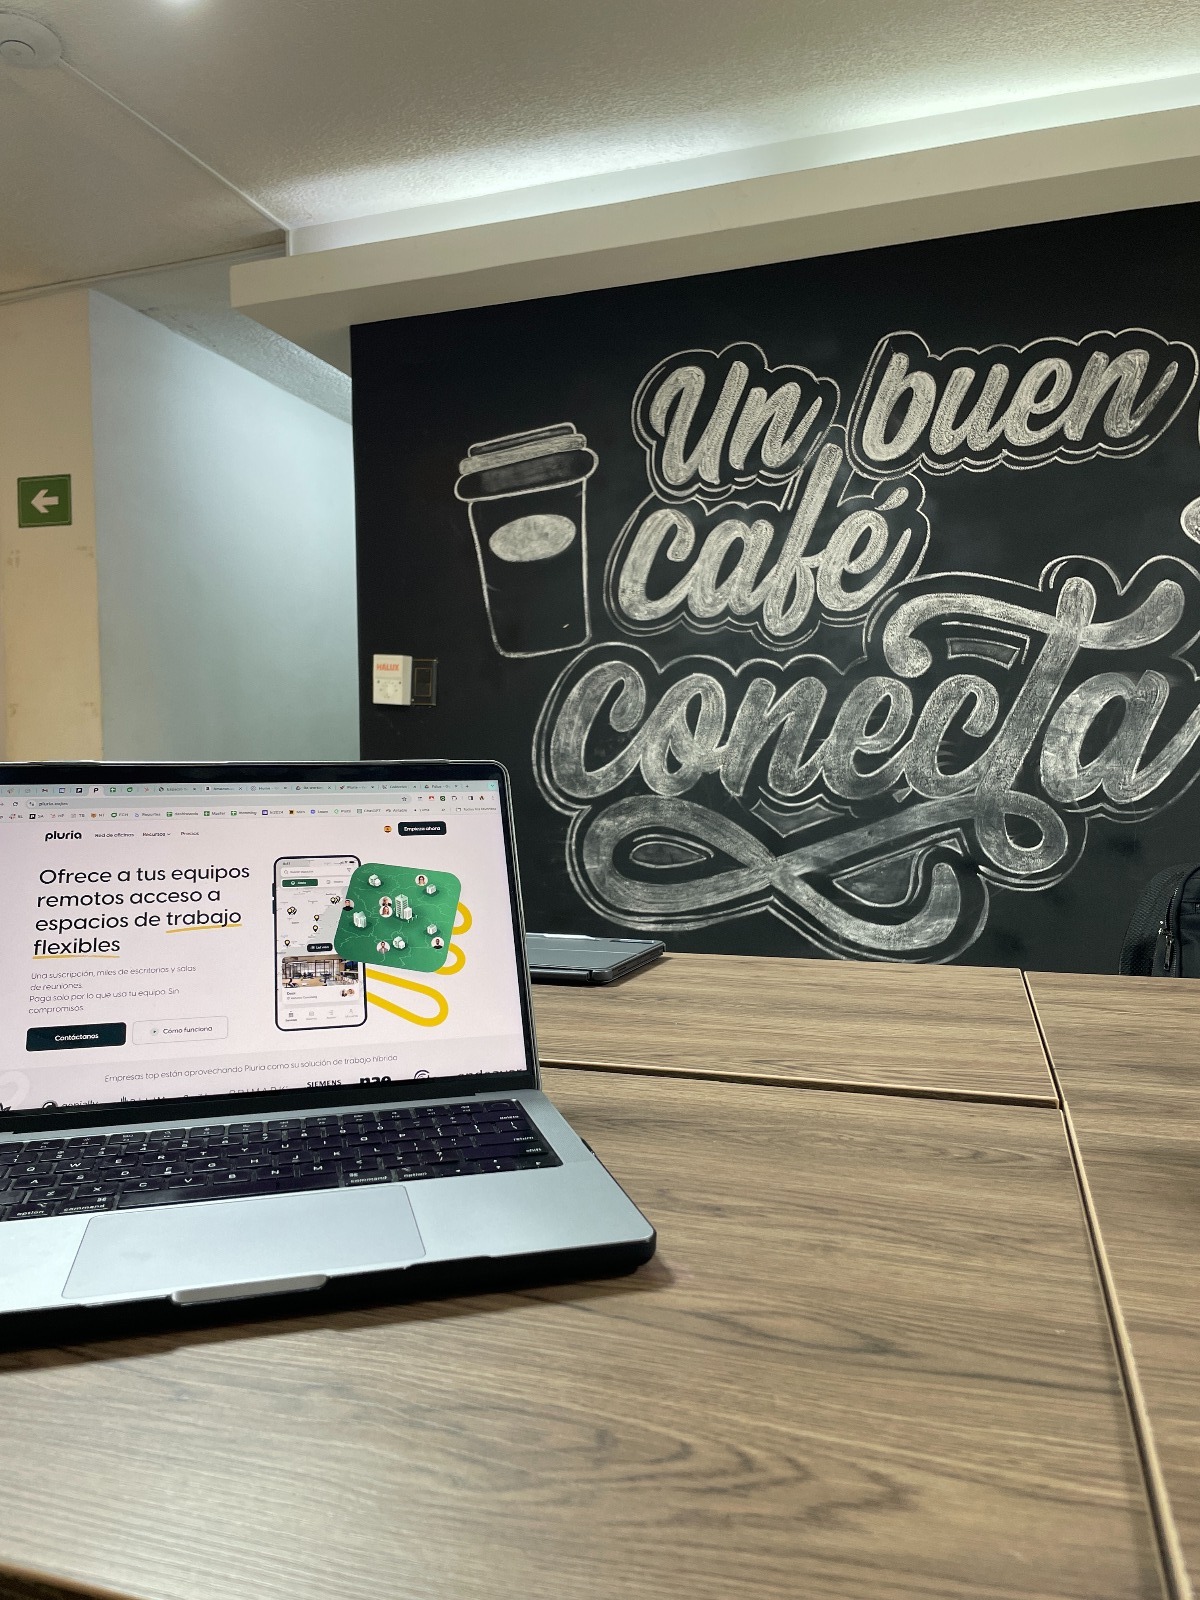 Colectivo Cafe Coworking-12